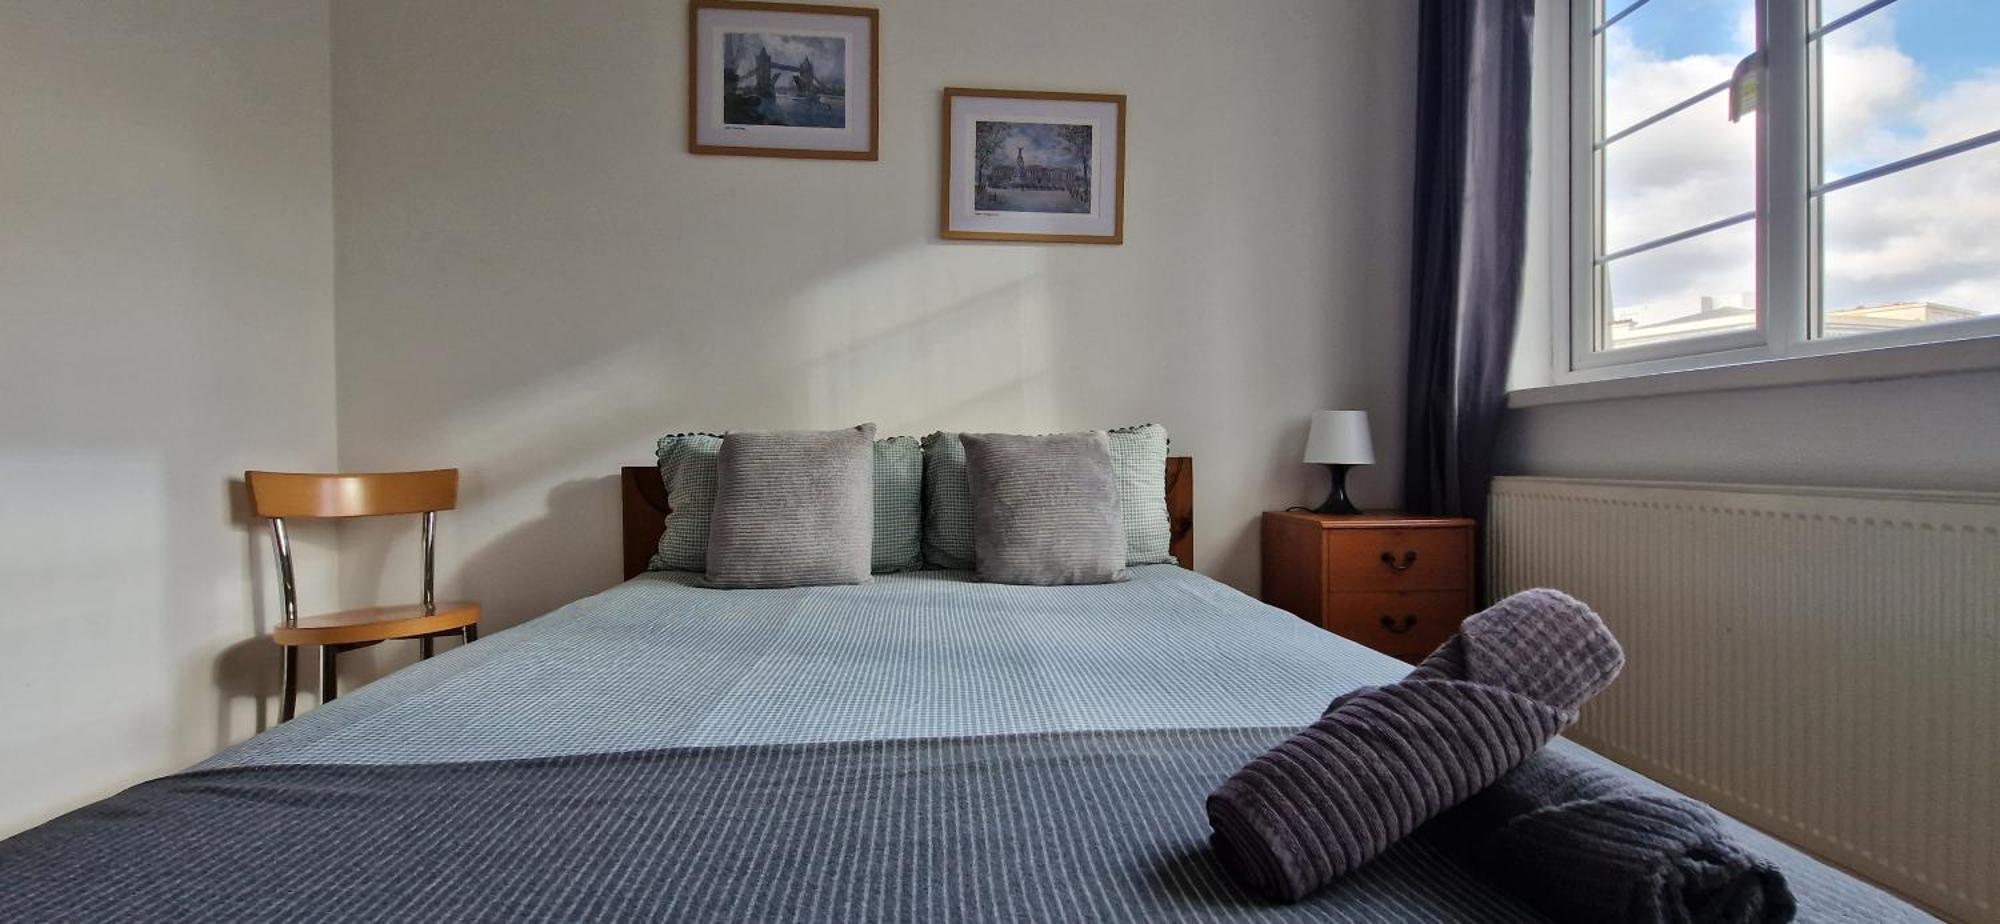 Affordable Rooms In Shared Flat, London Bridge 部屋 写真